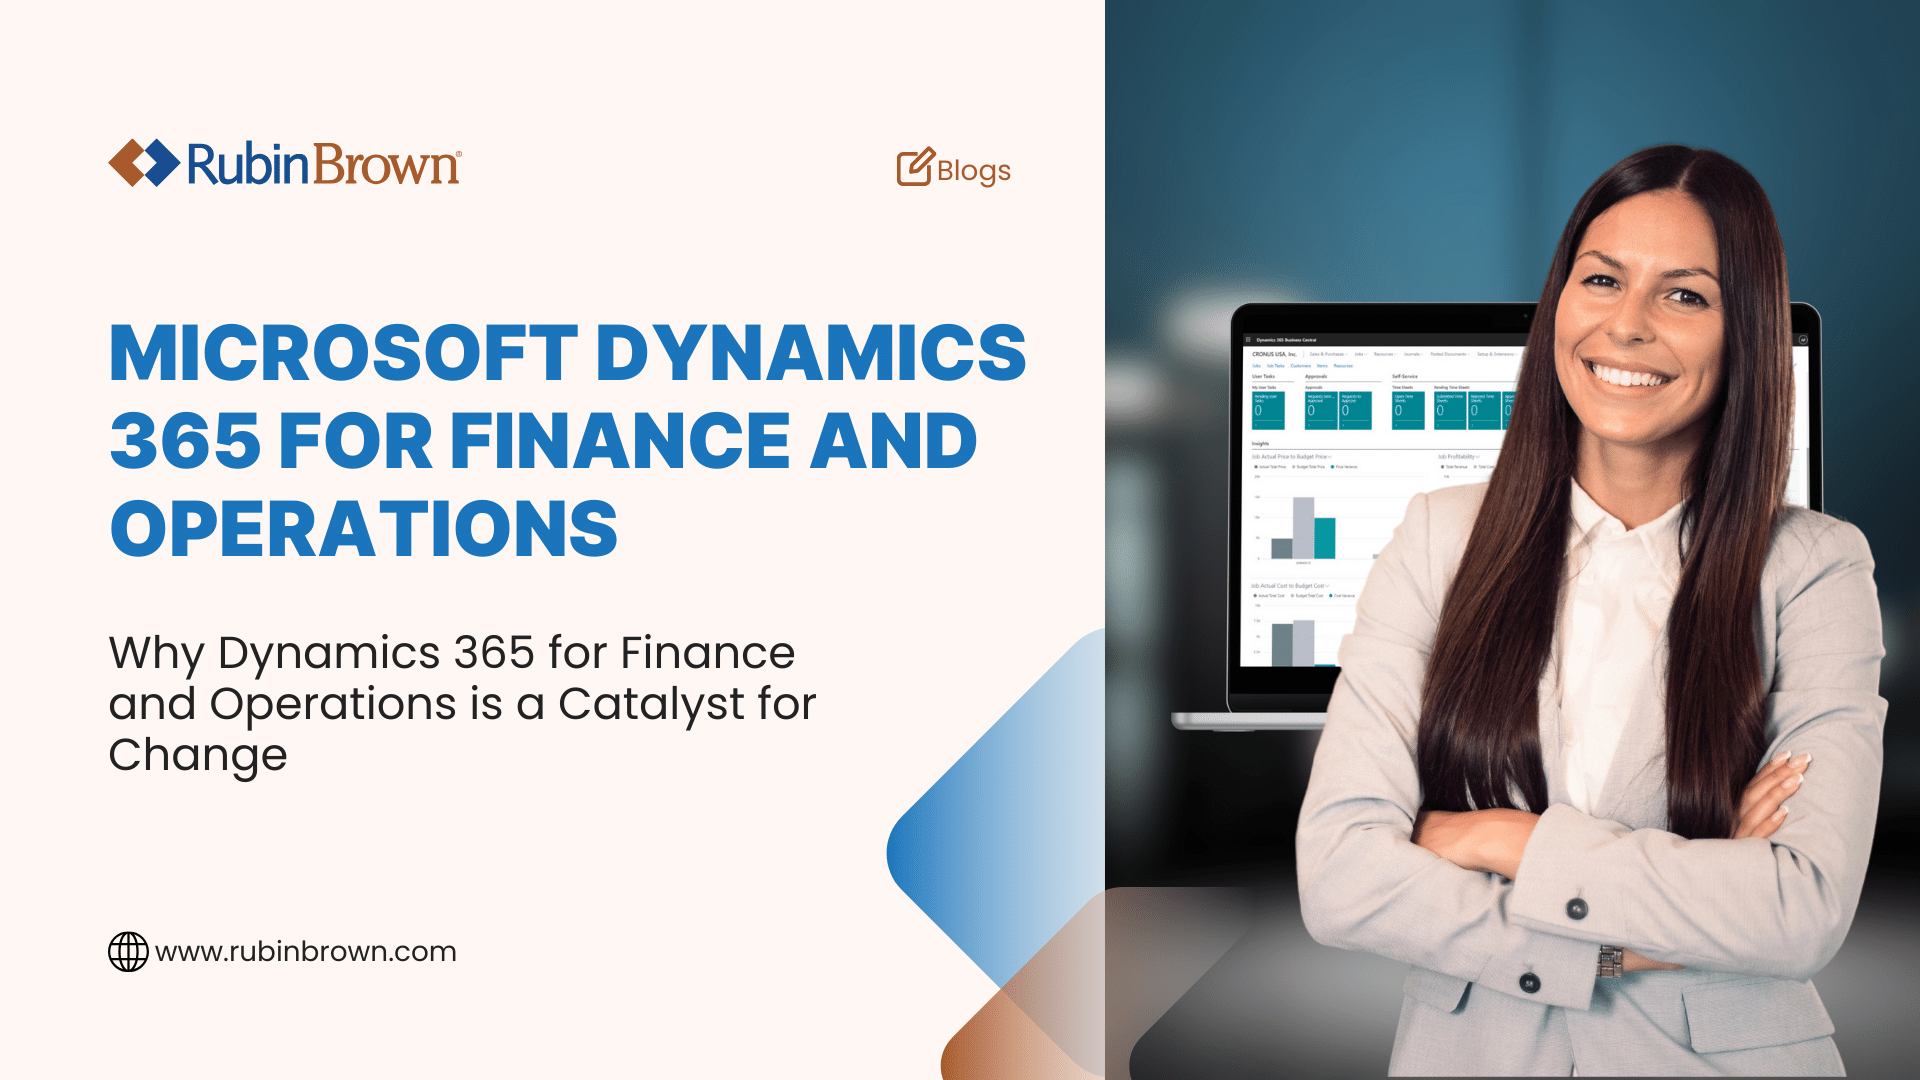 Overview of Microsoft Dynamics 365 Finance and Operations